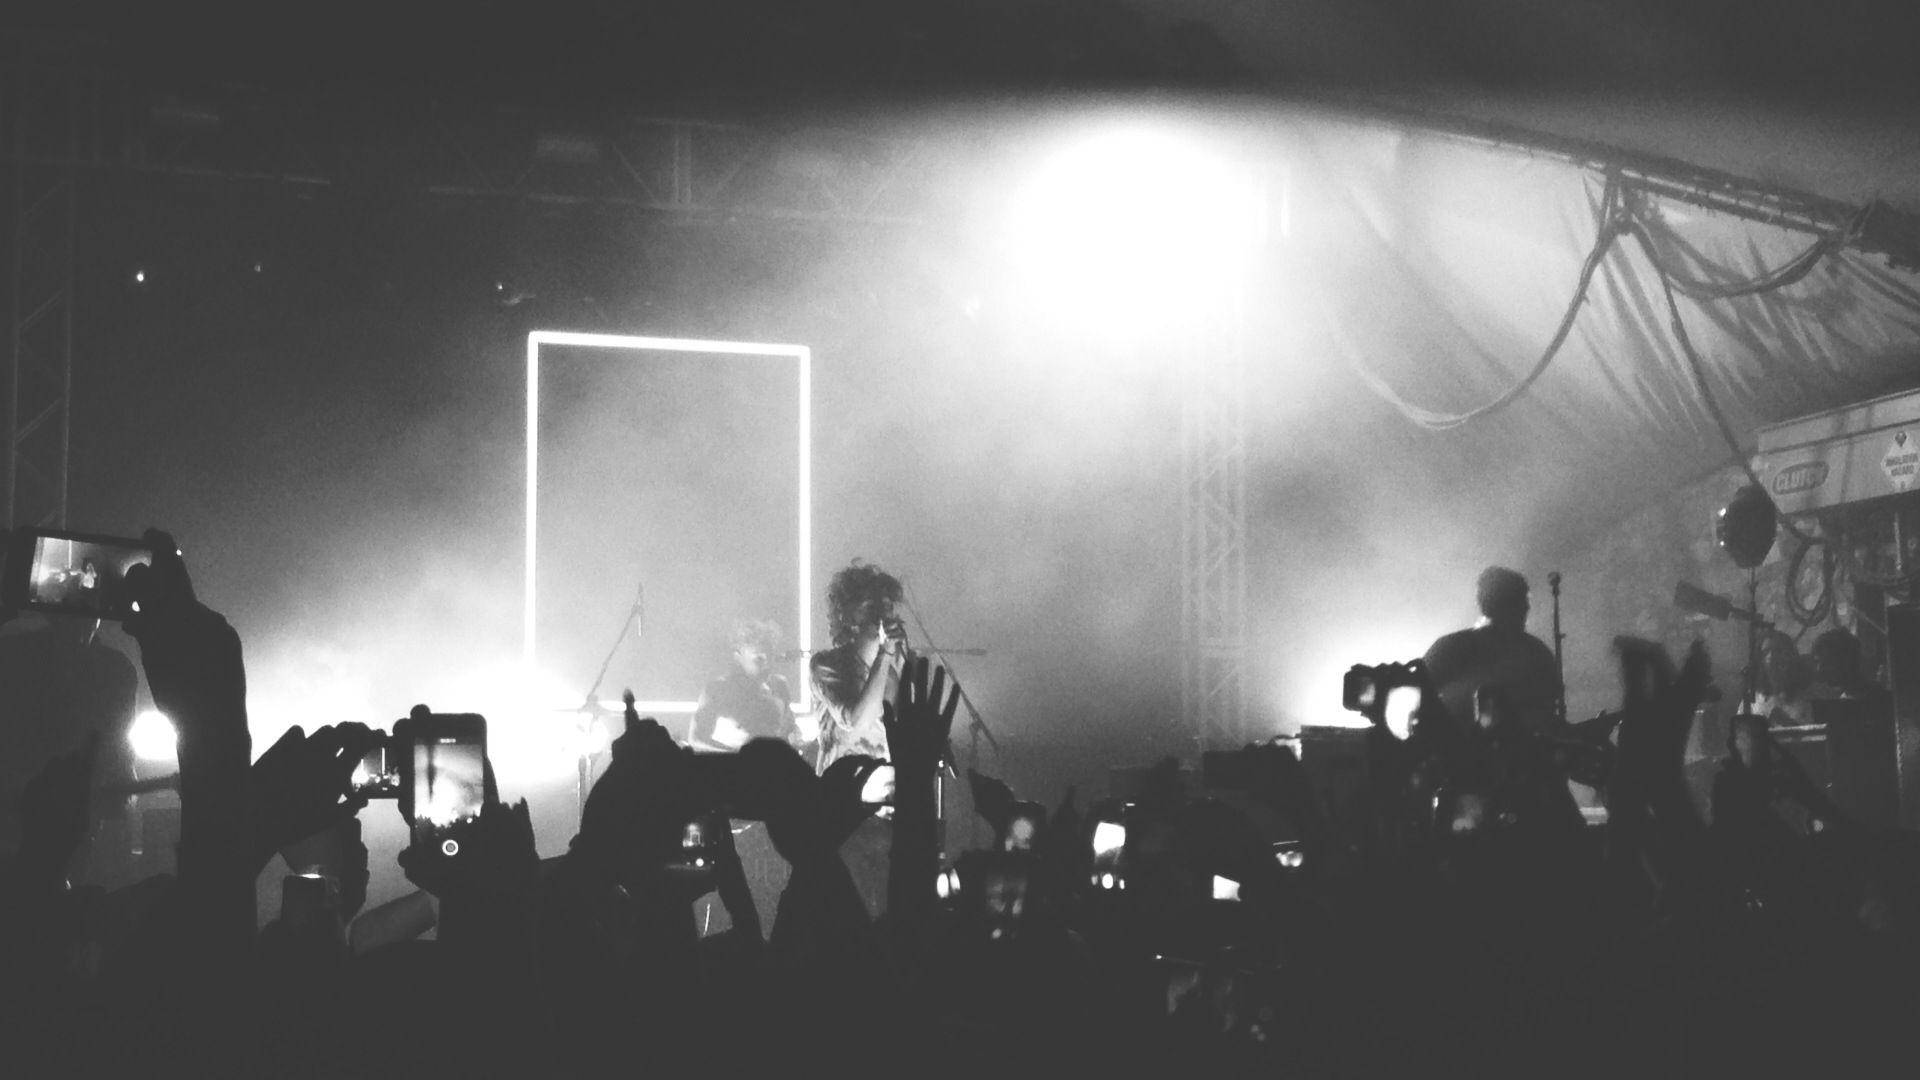 The 1975 Monochrome Concert Background